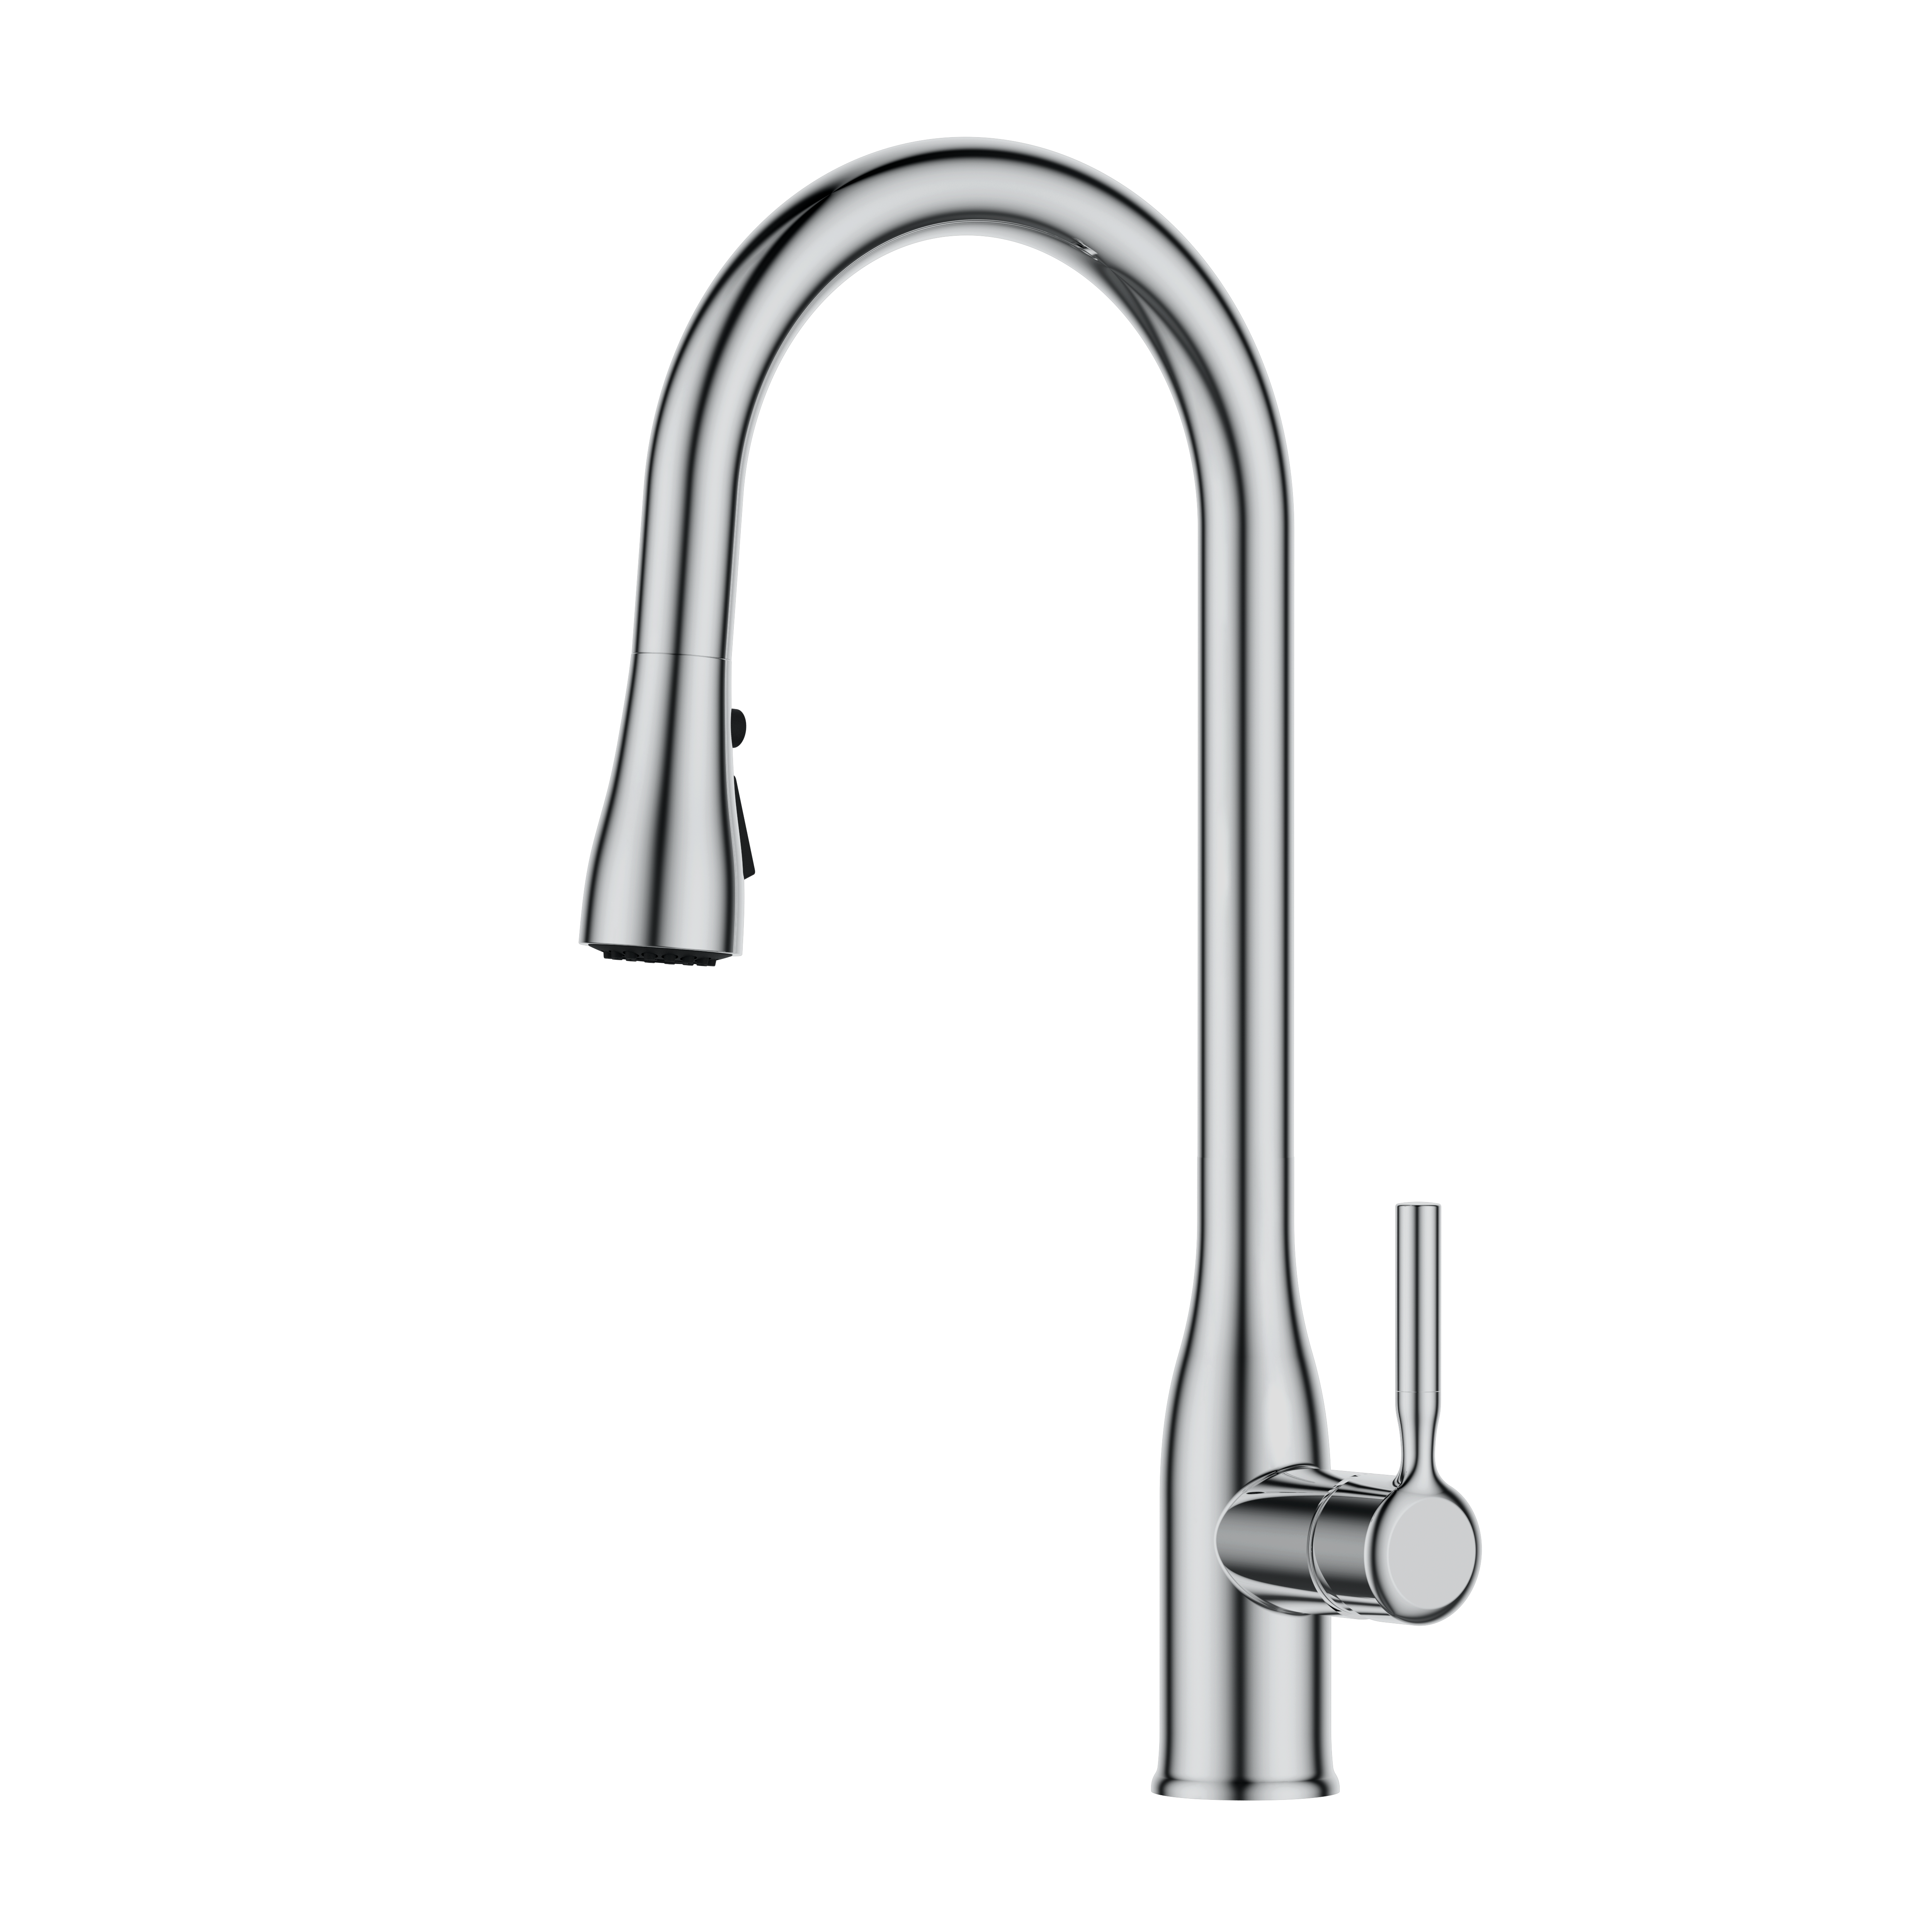 Hot Selling Kitchen Faucet Chrome